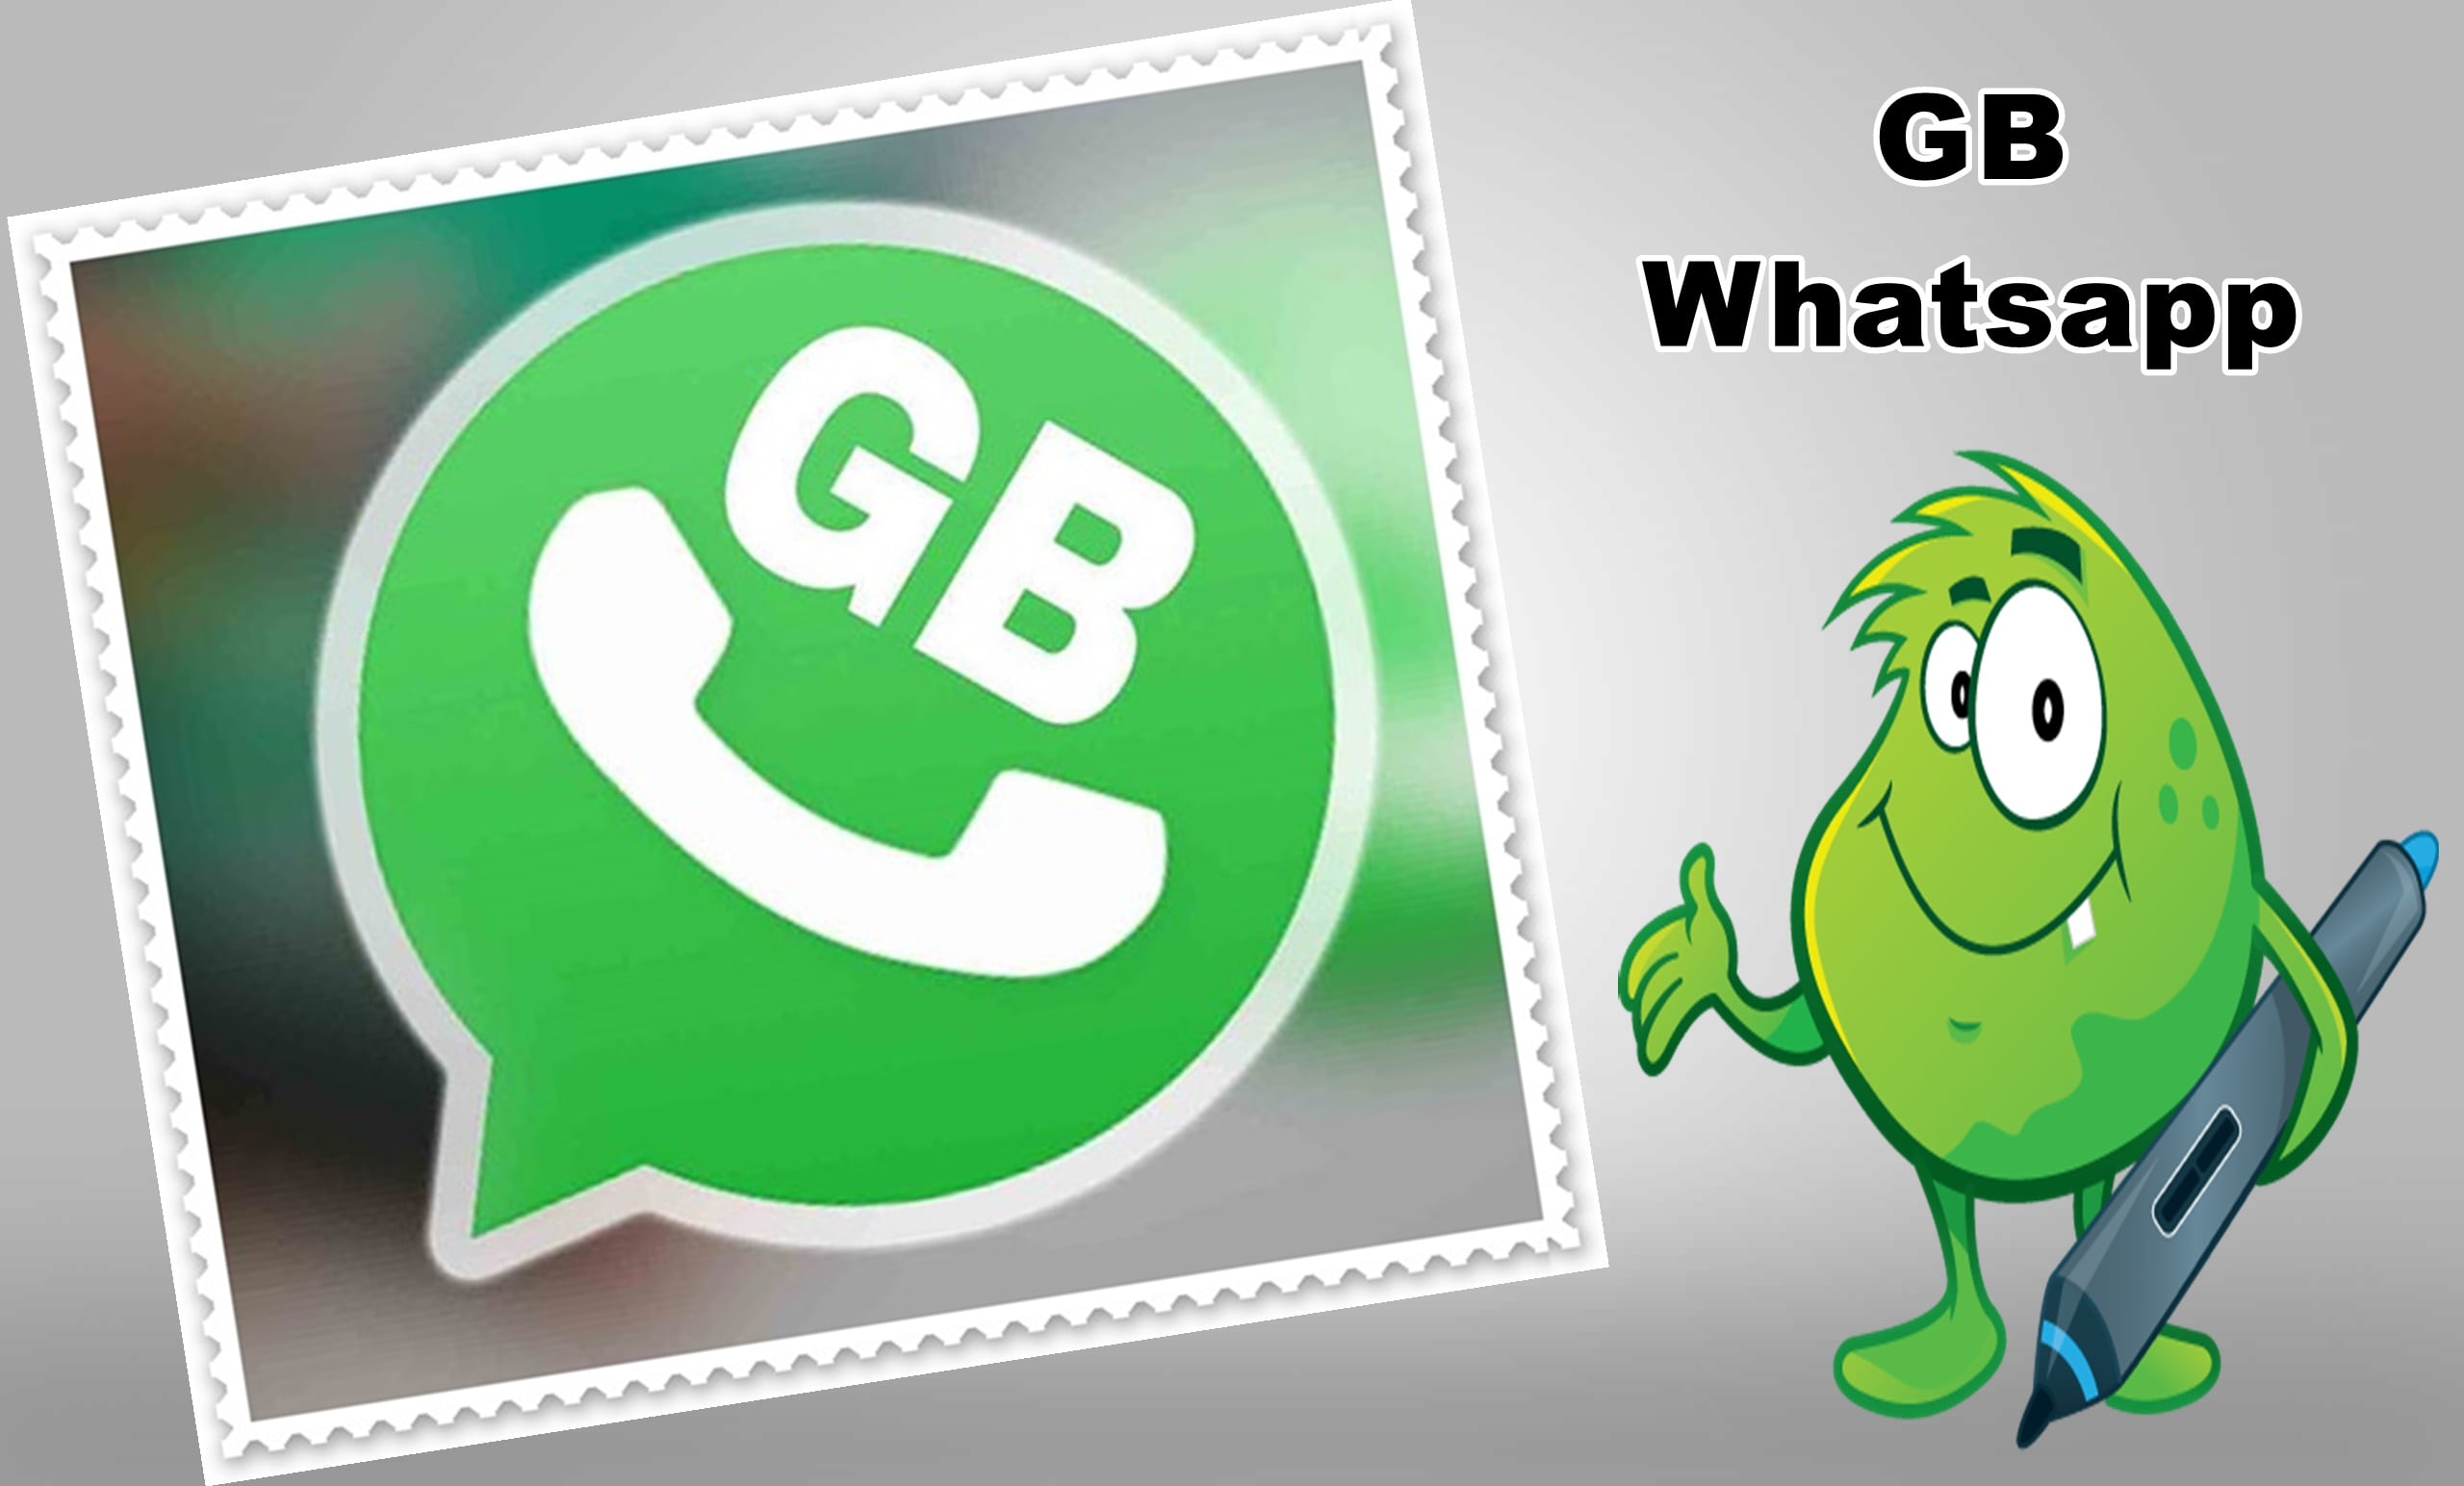 How to change themes in GB WhatsApp ?